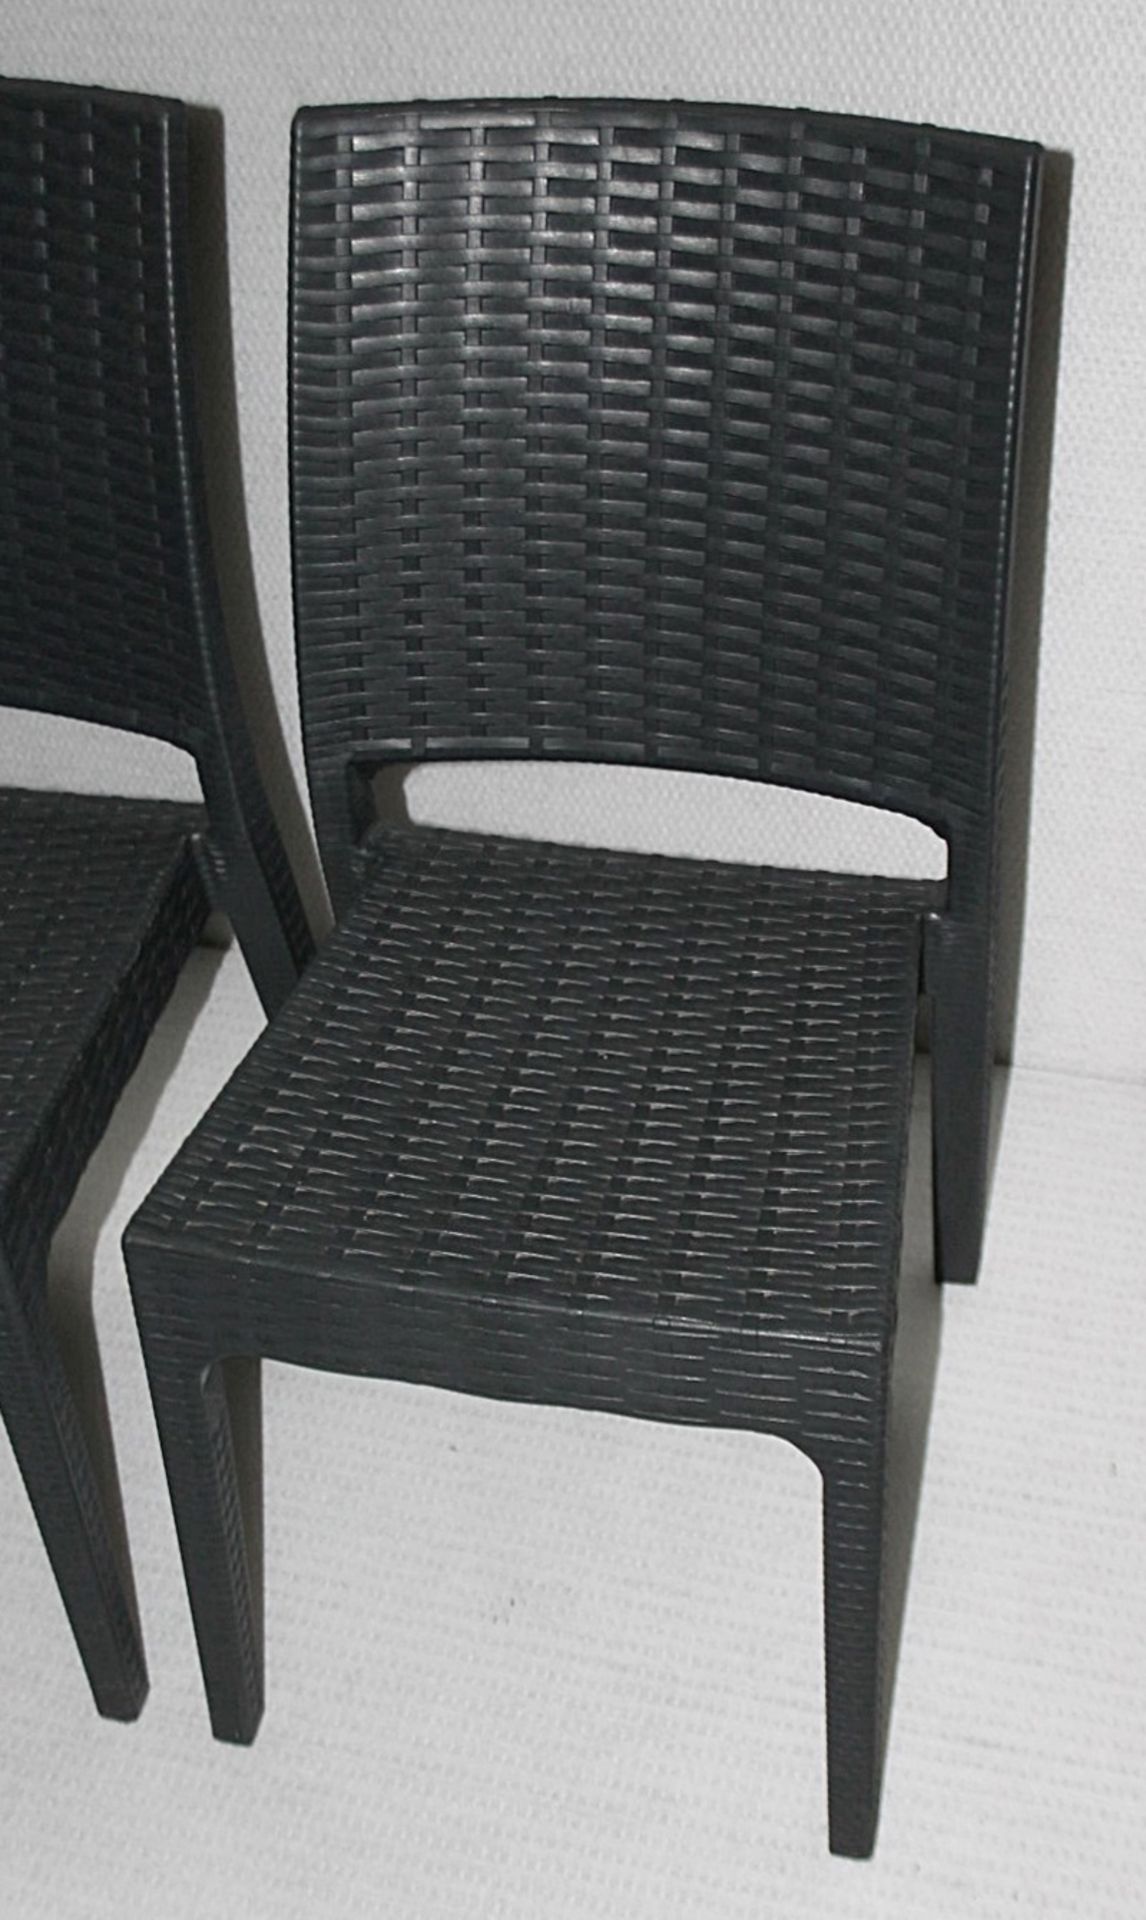 4 x SIESTA EXCLUSIVE 'Florida' Commercial Stackable Rattan-style Chairs In Dark Grey -CL987 - - Image 7 of 13